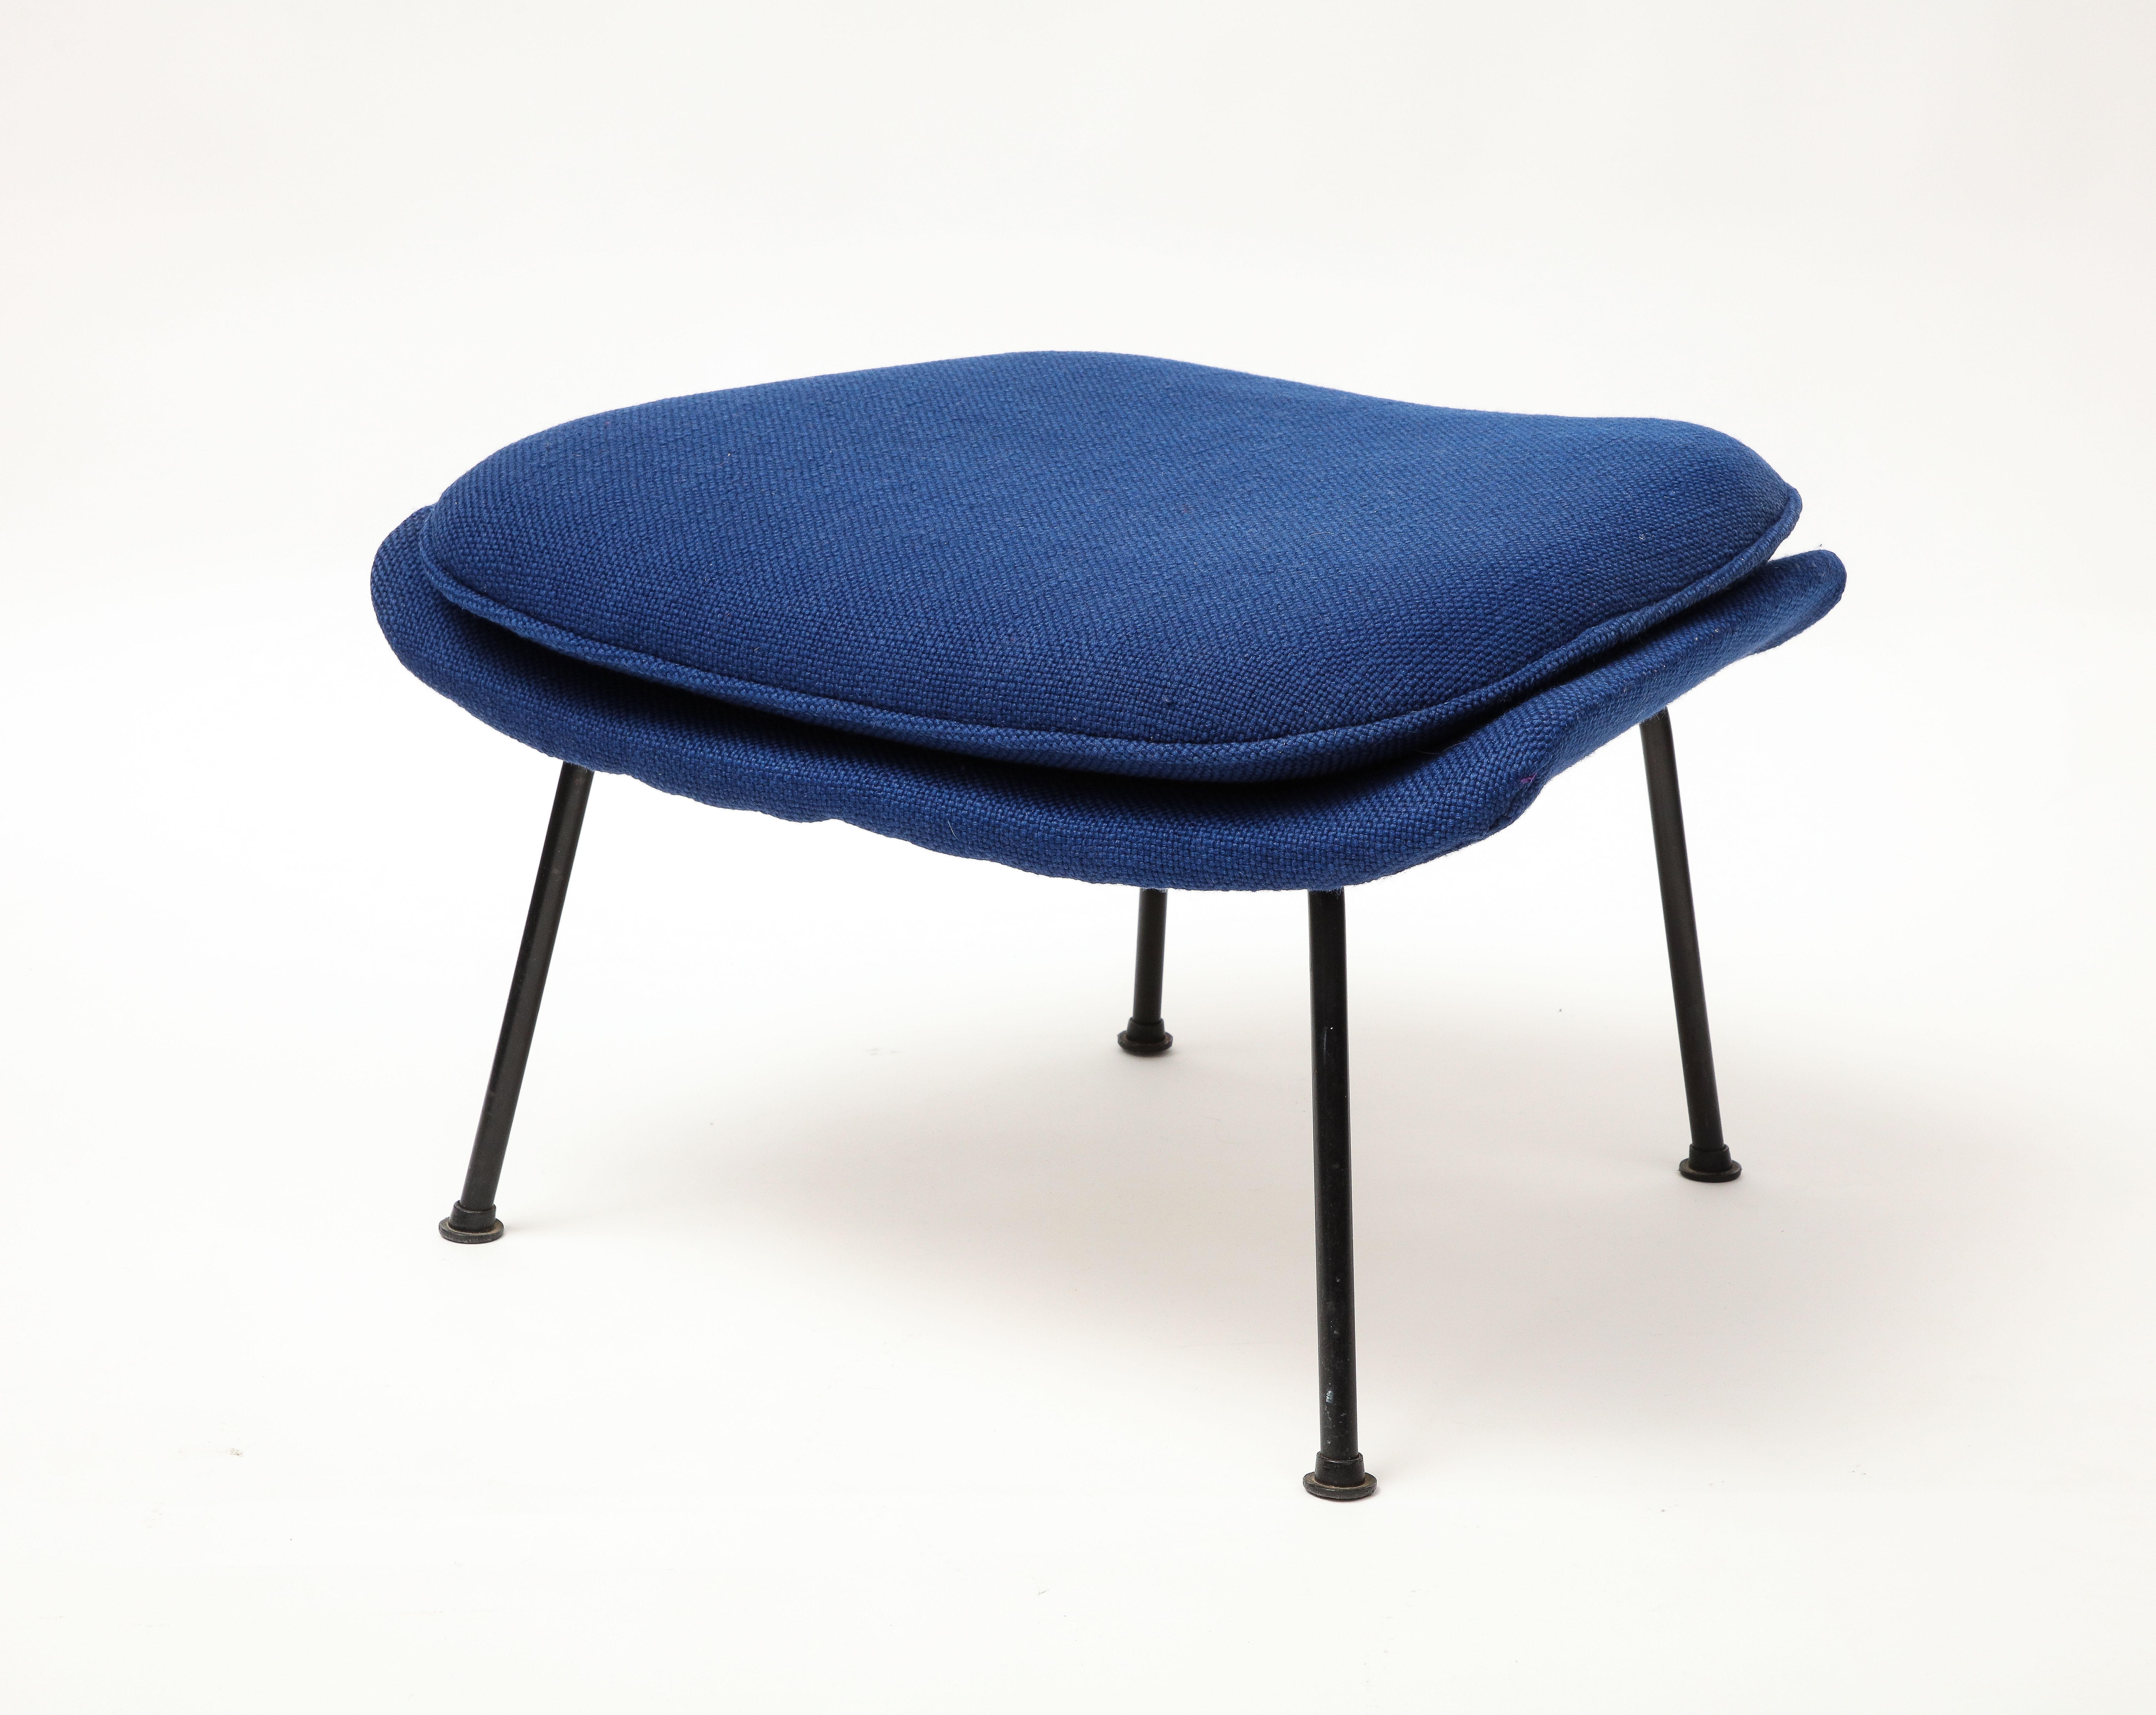 American Early Eero Saarinen Knoll Womb Chair & Ottoman, Blue Upholstery, Black Frame For Sale